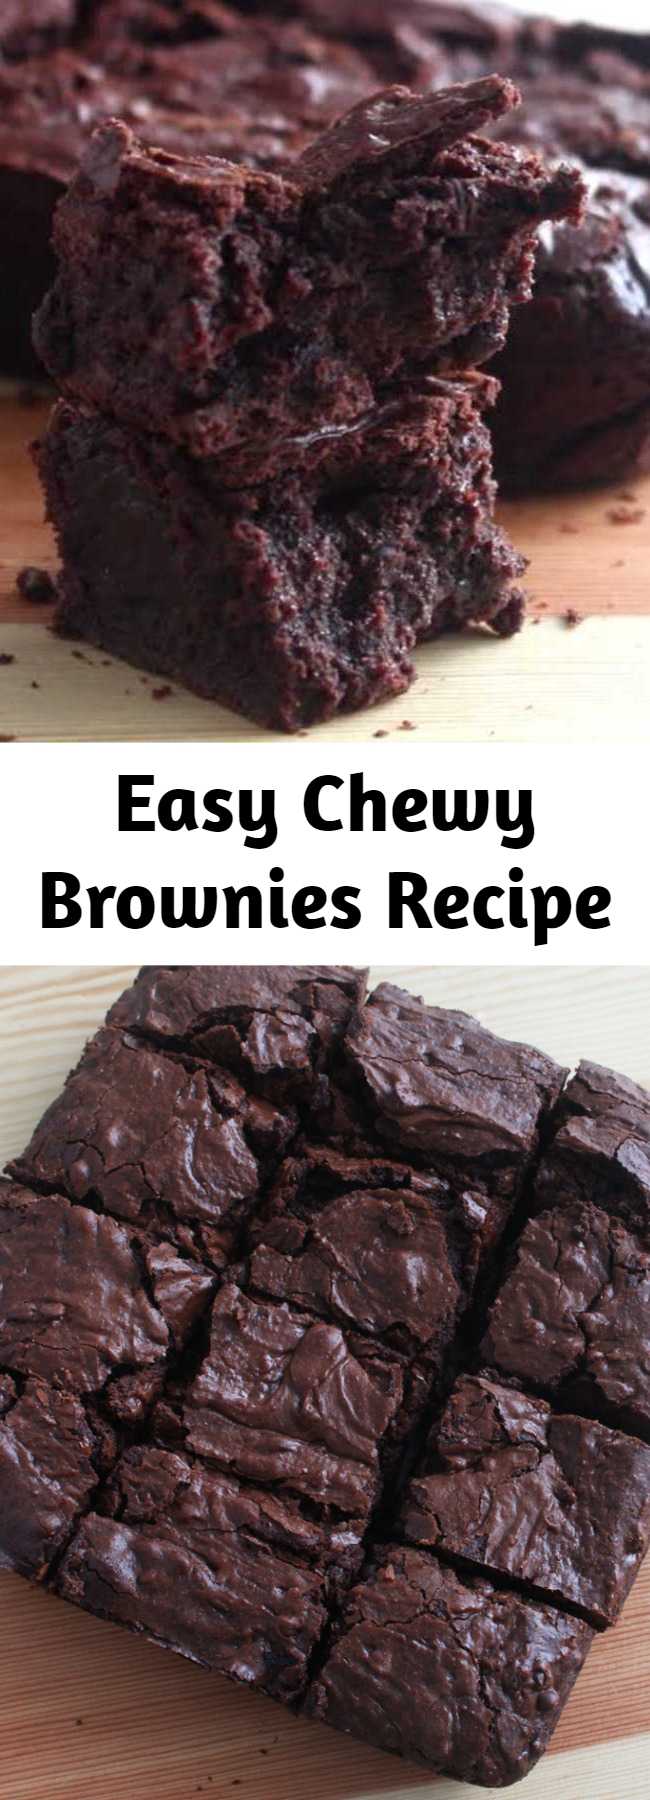 Easy Chewy Brownies Recipe - These are quite possibly the most chewy, moist brownies we've ever made. These brownies are so chewy and moist and perfect for any chocolate craving!